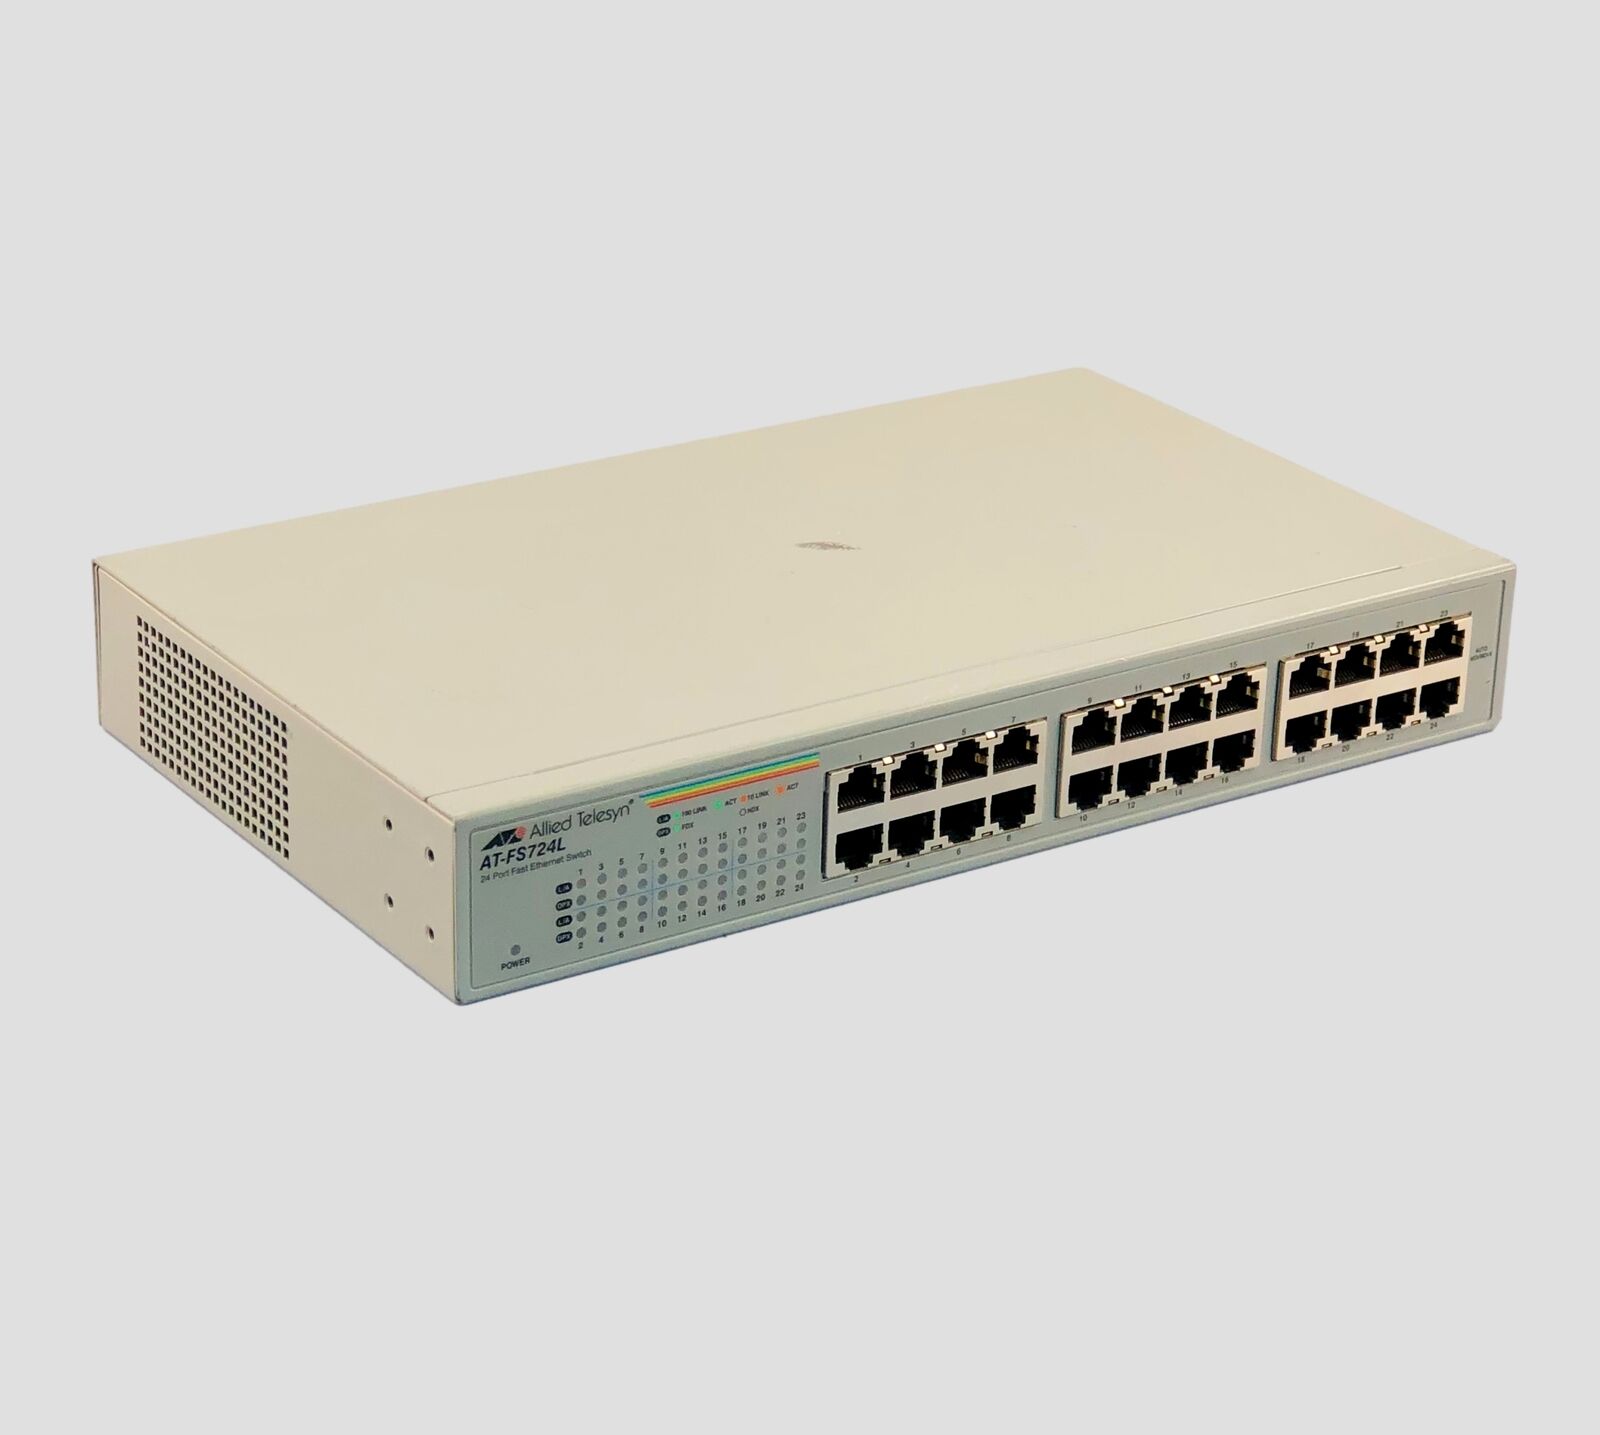 Allied Telesyn AT-FS724L Ethernet Switch 24 Port Unmanaged